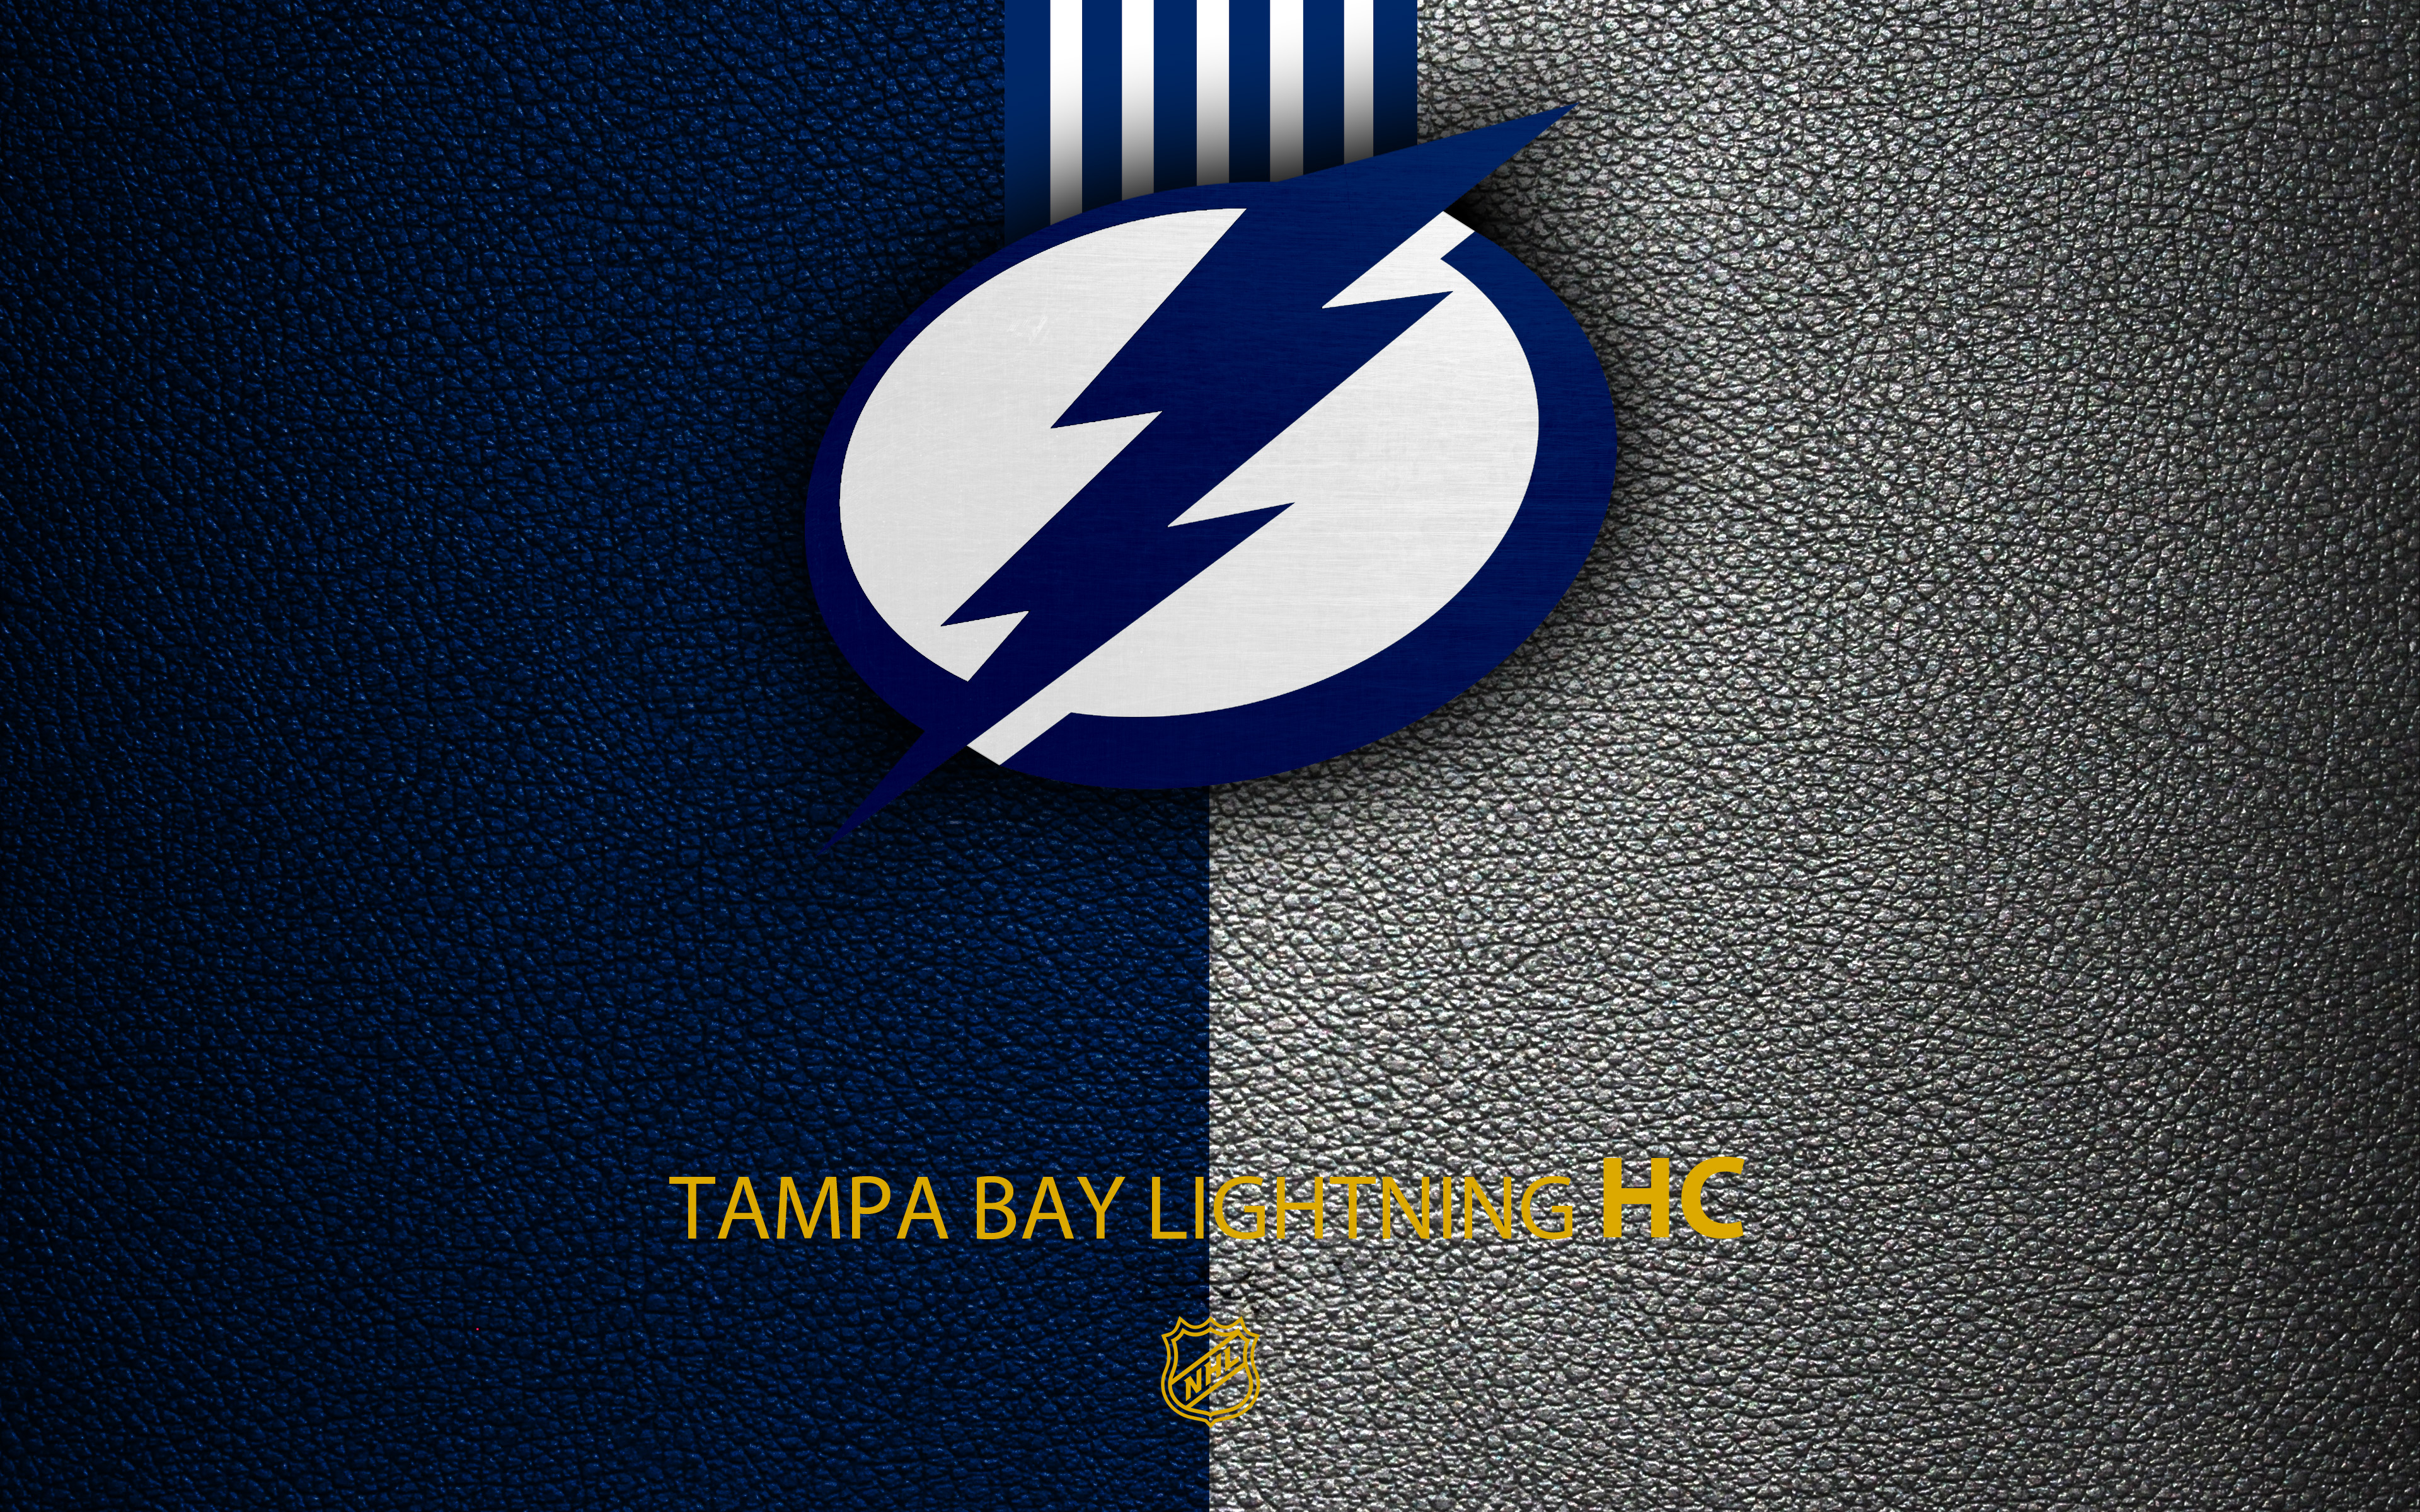 Free Tampa Bay Lightning phone backgrounds, social banners